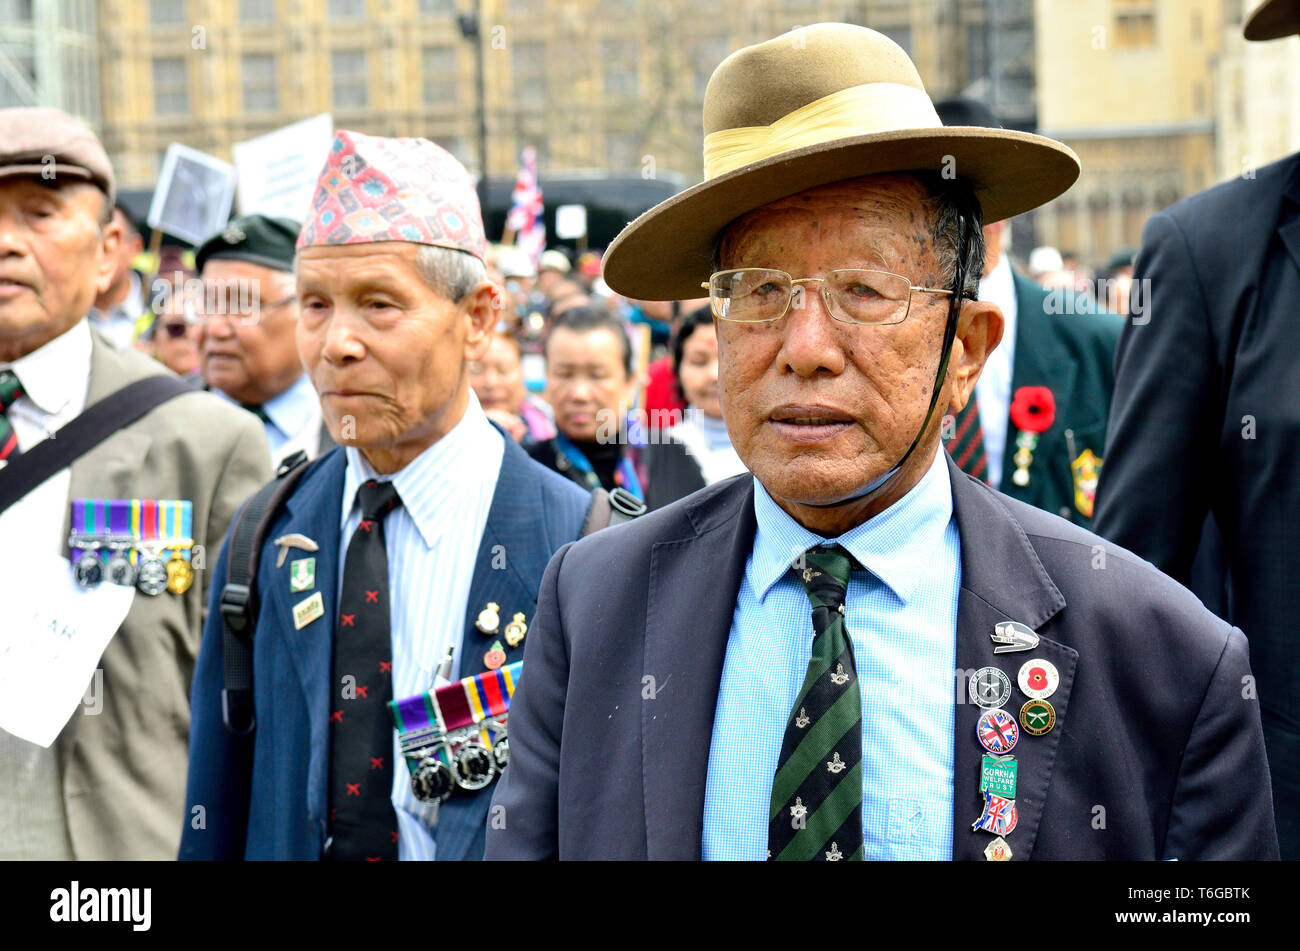 London, UK. 1st May 2019. Gurkha veterans march to Parliament Square demanding equal rights with British and Commonwealth soldiers Credit: PjrFoto/Alamy Live News Stock Photo